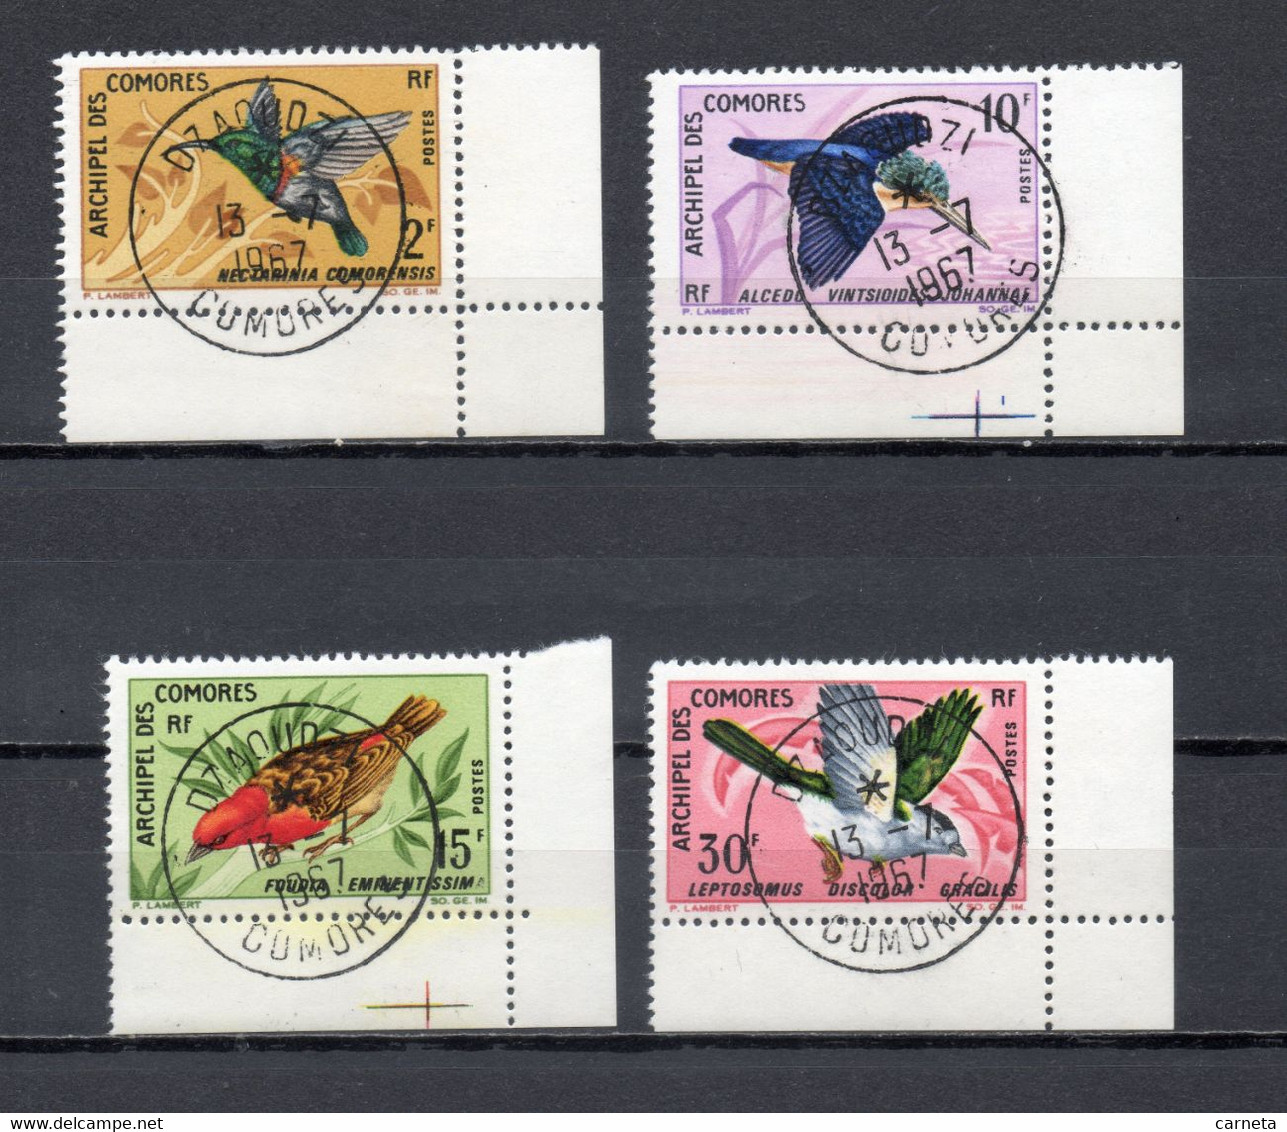 COMORES N° 41 à 44  OBLITERES  COTE 30.00€   FAUNE OISEAUX ANIMAUX - Used Stamps